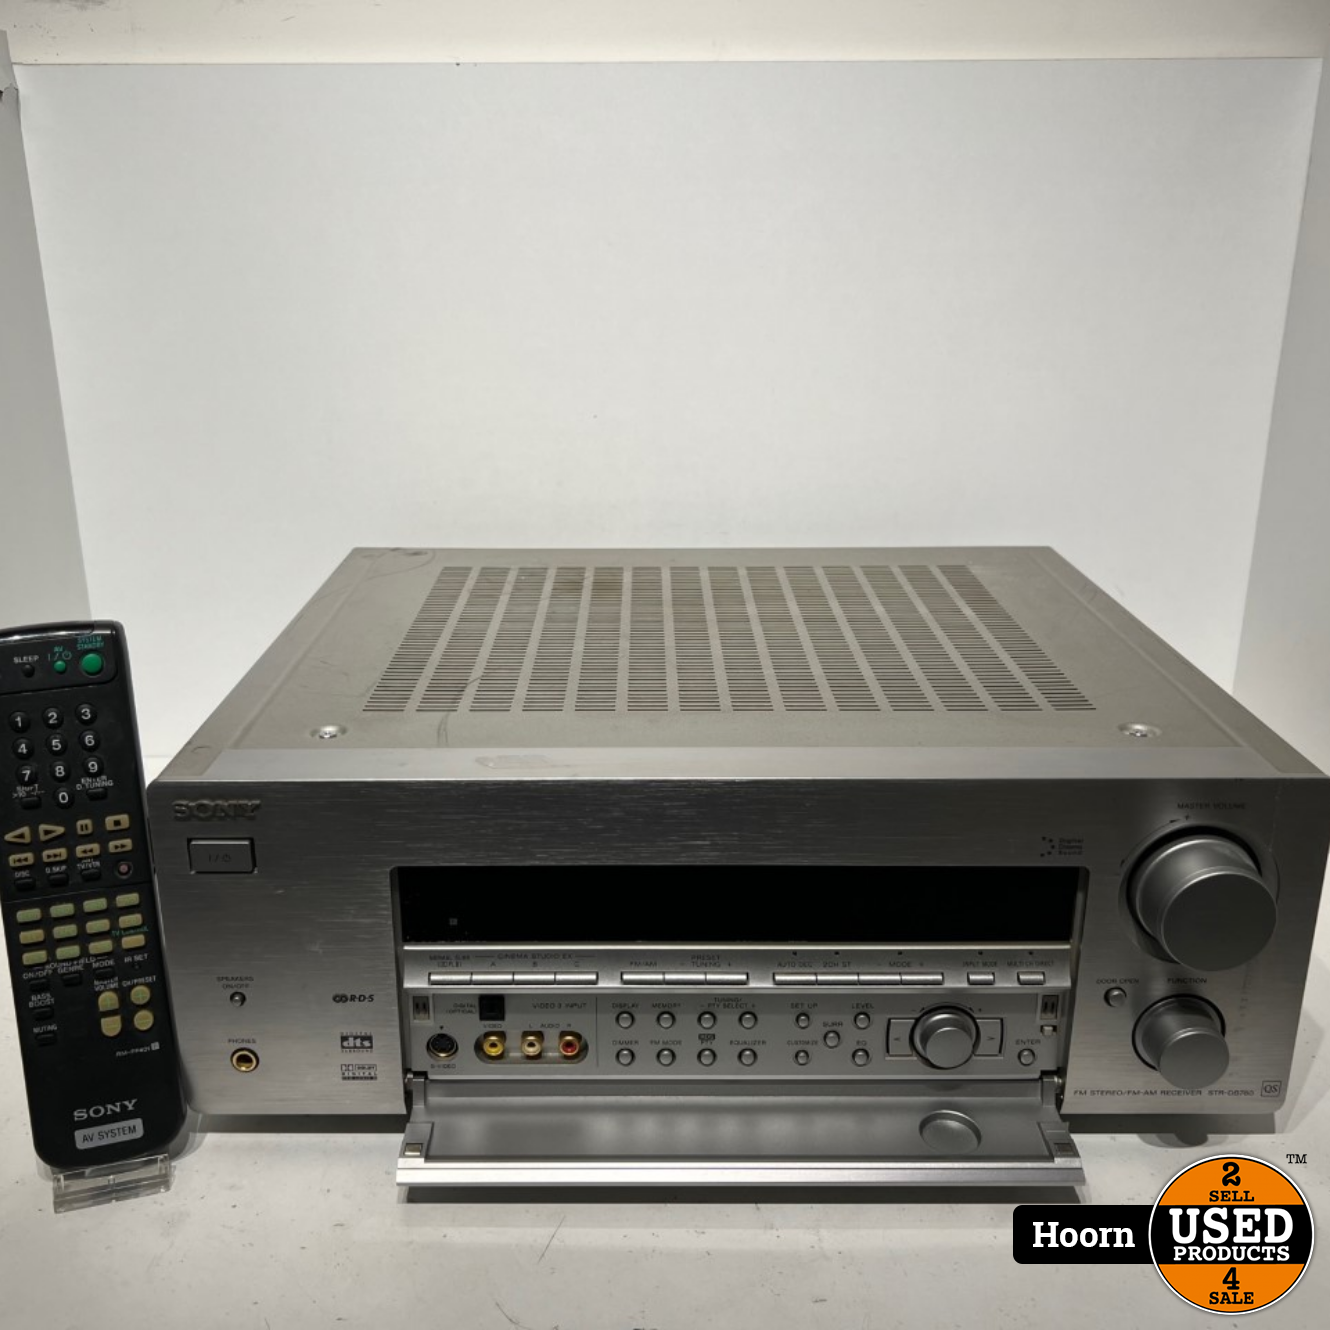 Beschrijving Marine camouflage sony Sony STR-DB780 FM Stereo FM/AM Receiver/Versterker incl.  Afstandsbediening - Used Products Hoorn